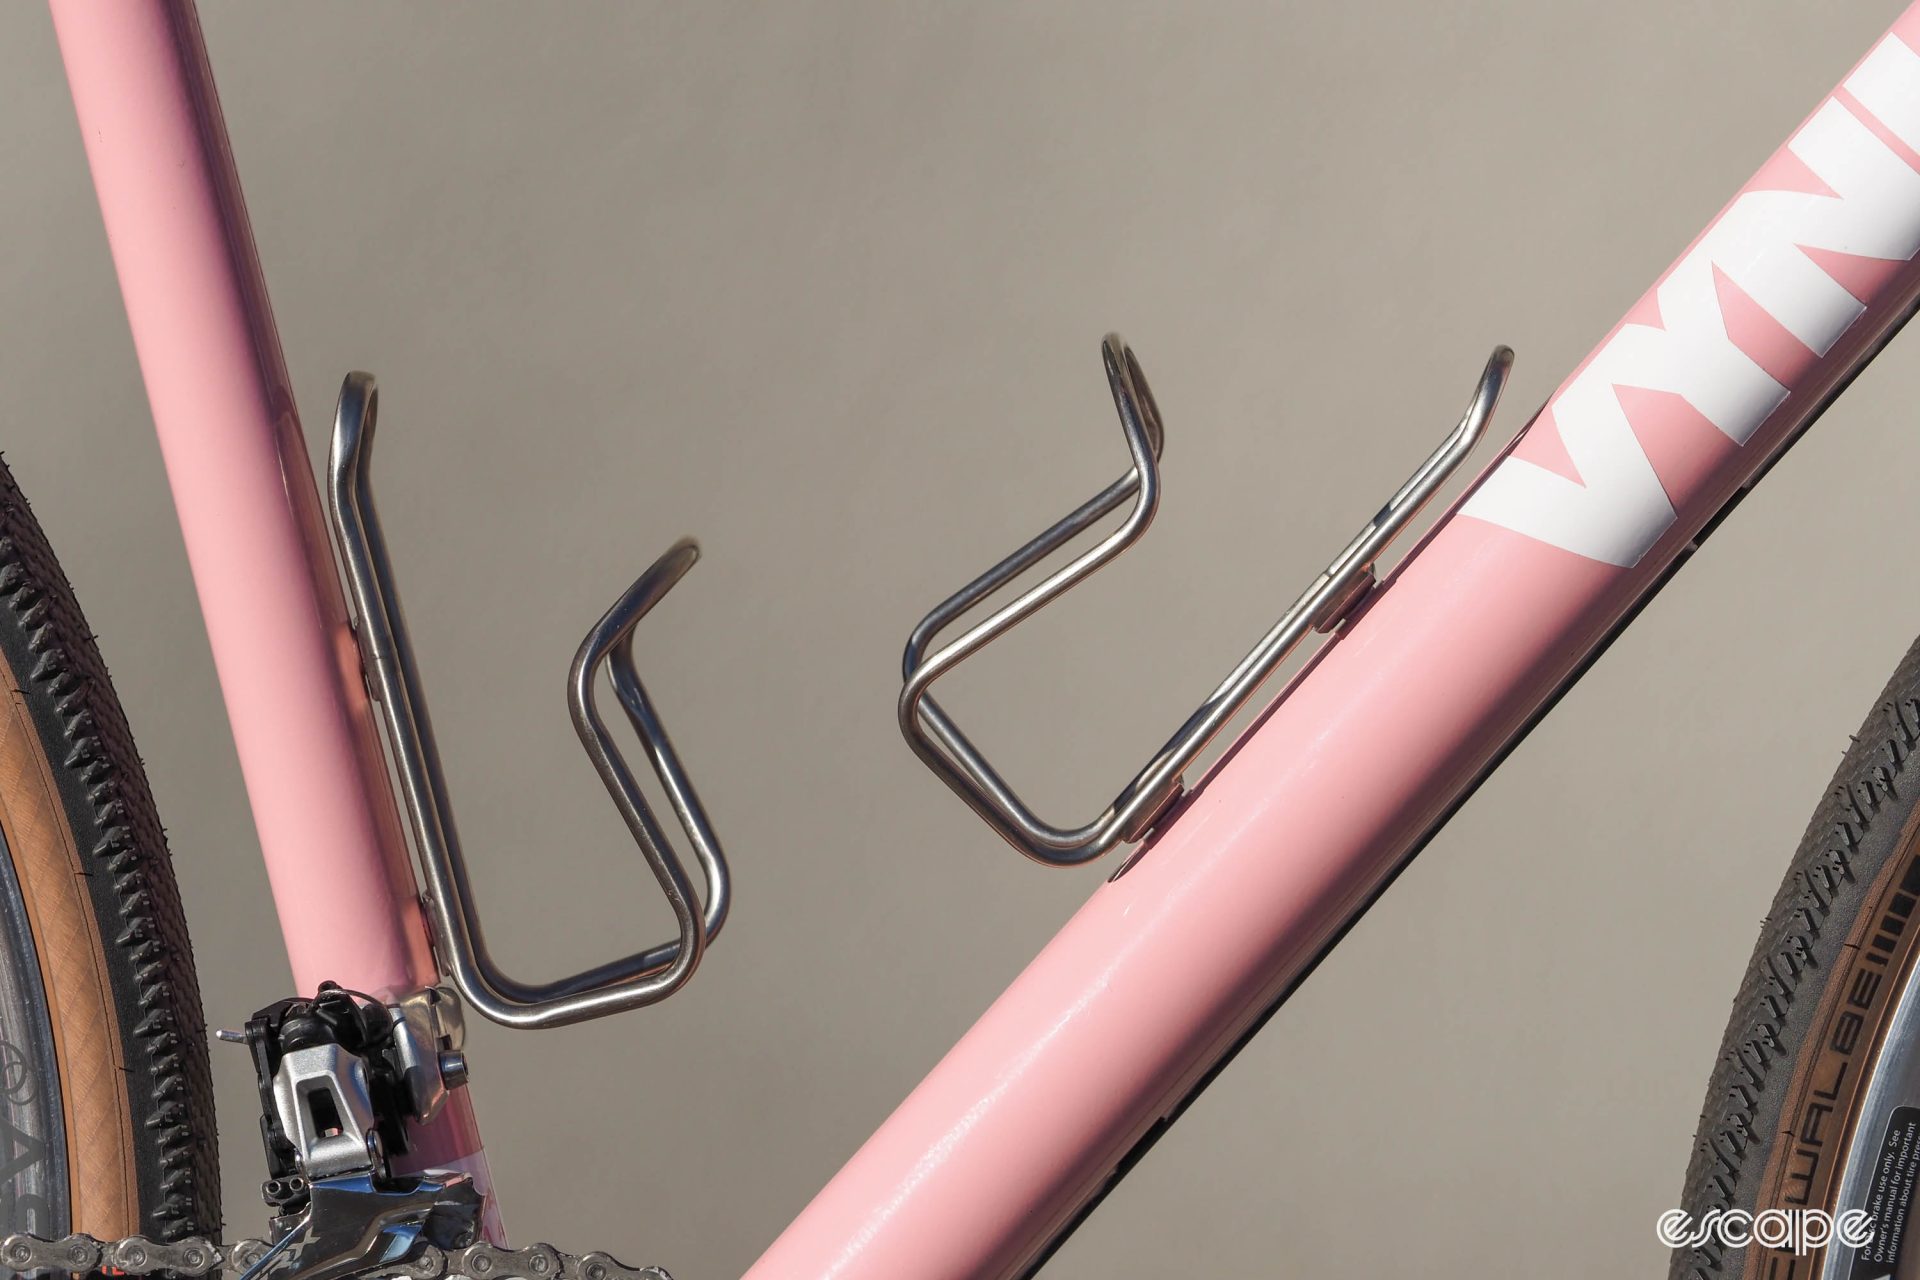 King stainless steel bottle cages on pink Vynl frame